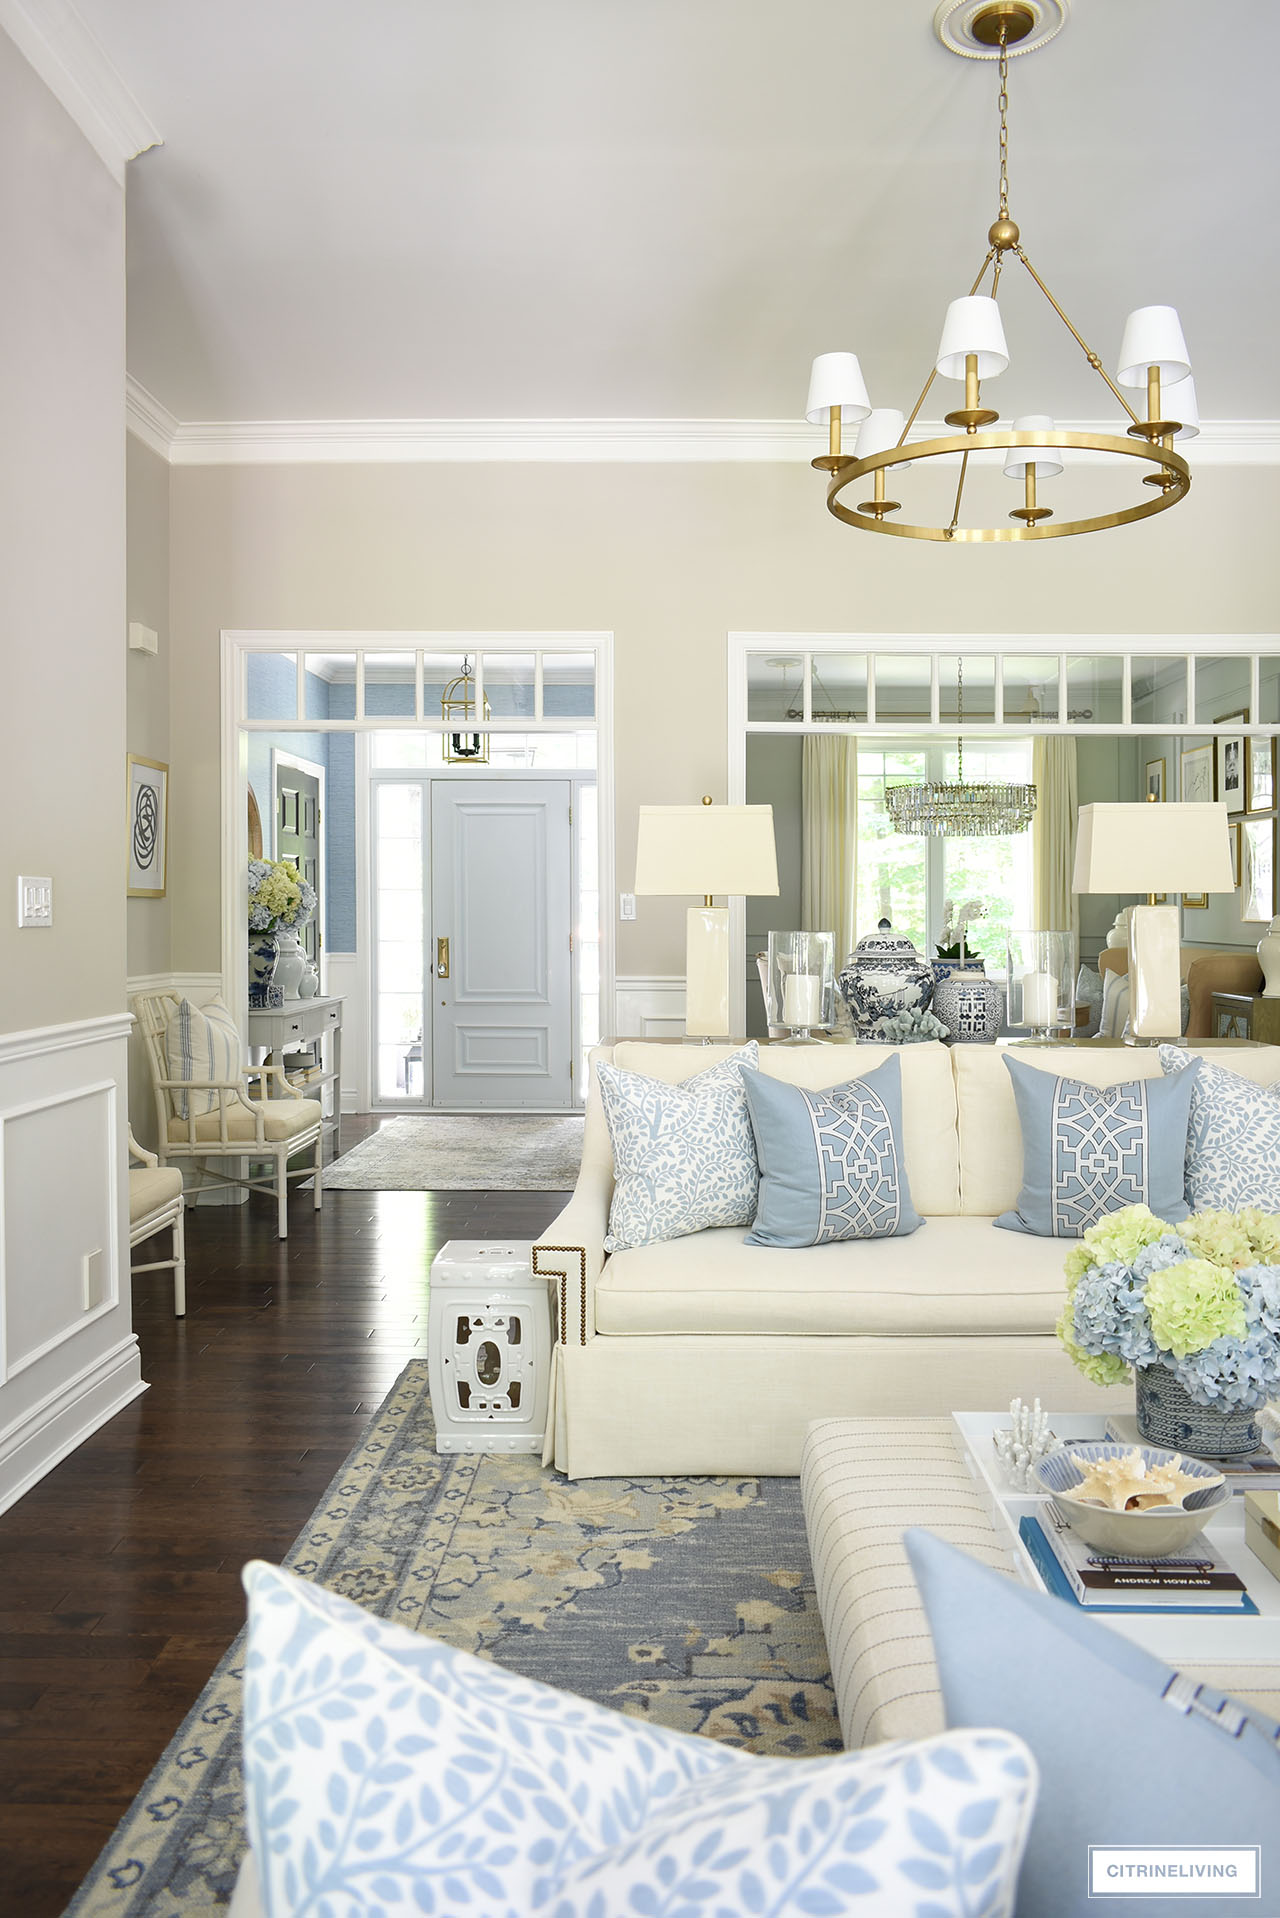 Summer styled living room in soft blues and warm whites with blue and green hydrangeas, chinoiserie accents and coastal accessories.